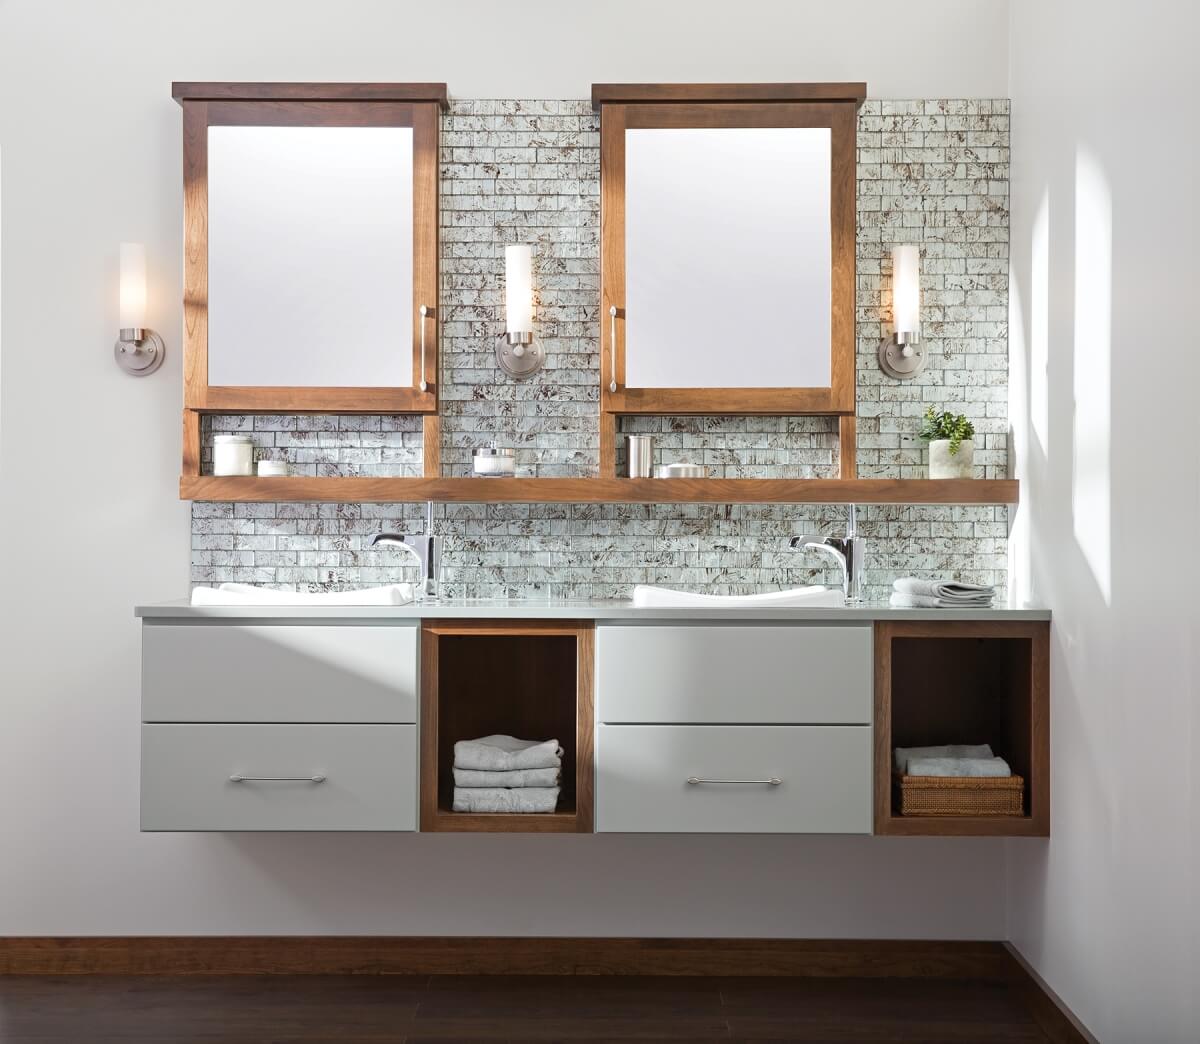 Floating vanity with wall hung bathroom cabinets from Dura Supreme Cabinetry.